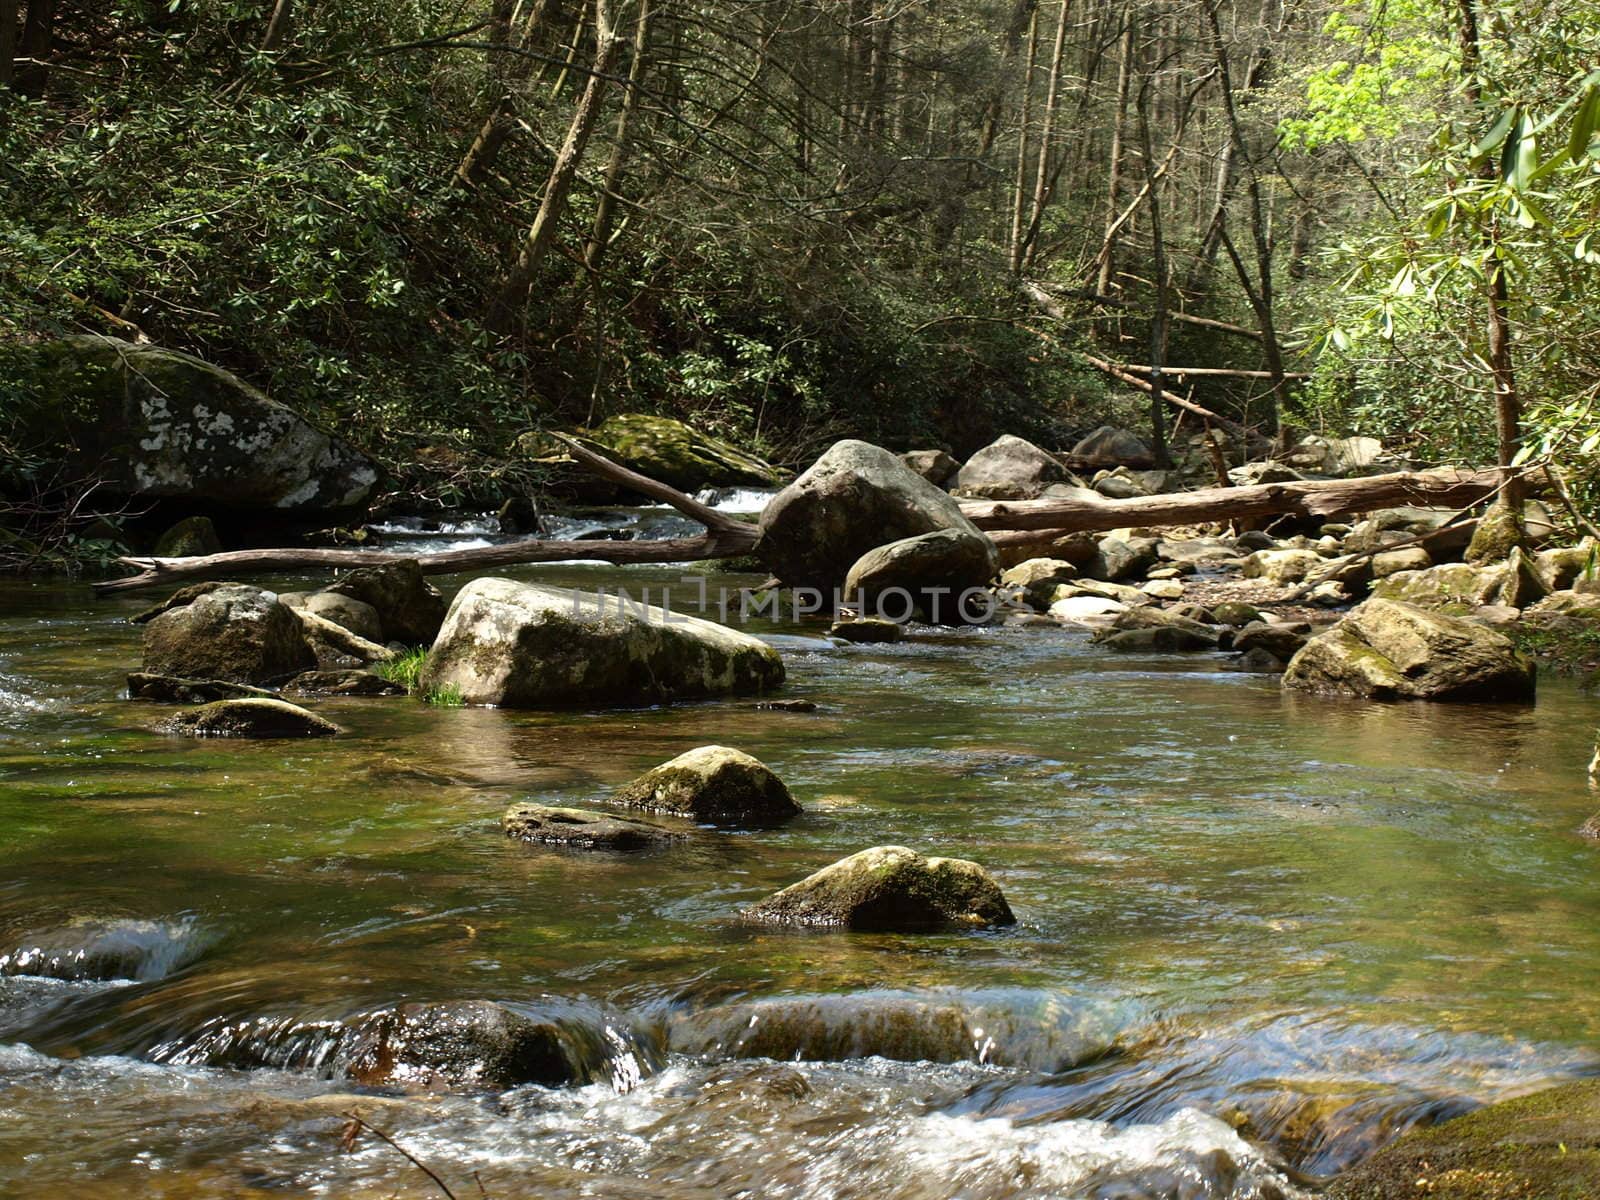 A creek in rural North Carolina during the spring